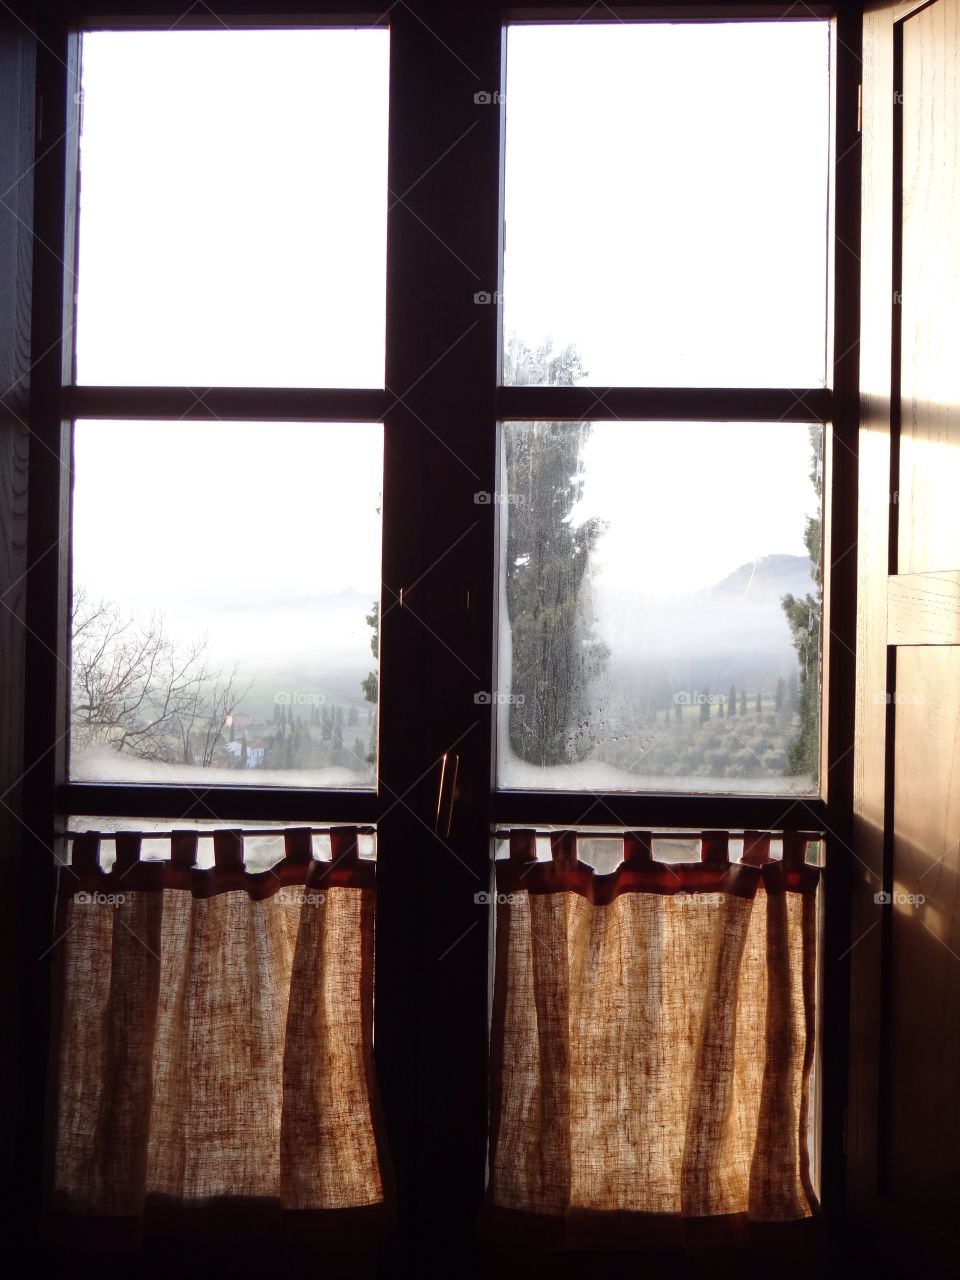 Tuscan landscape seen from an old window